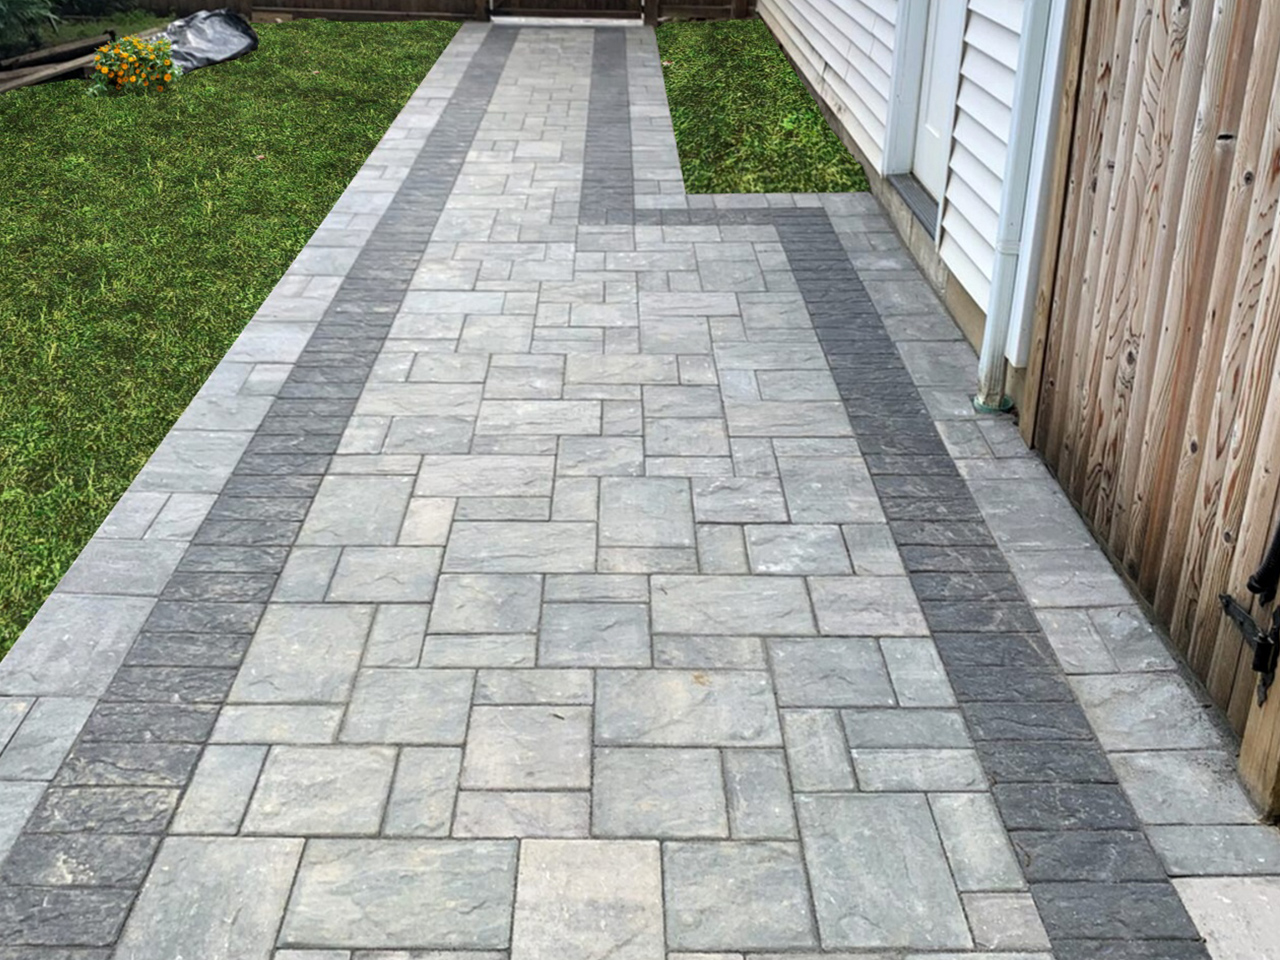 paver walkway installation. A beautifully designed walkway by Affordable Patio, featuring a combination of pavers and natural stone